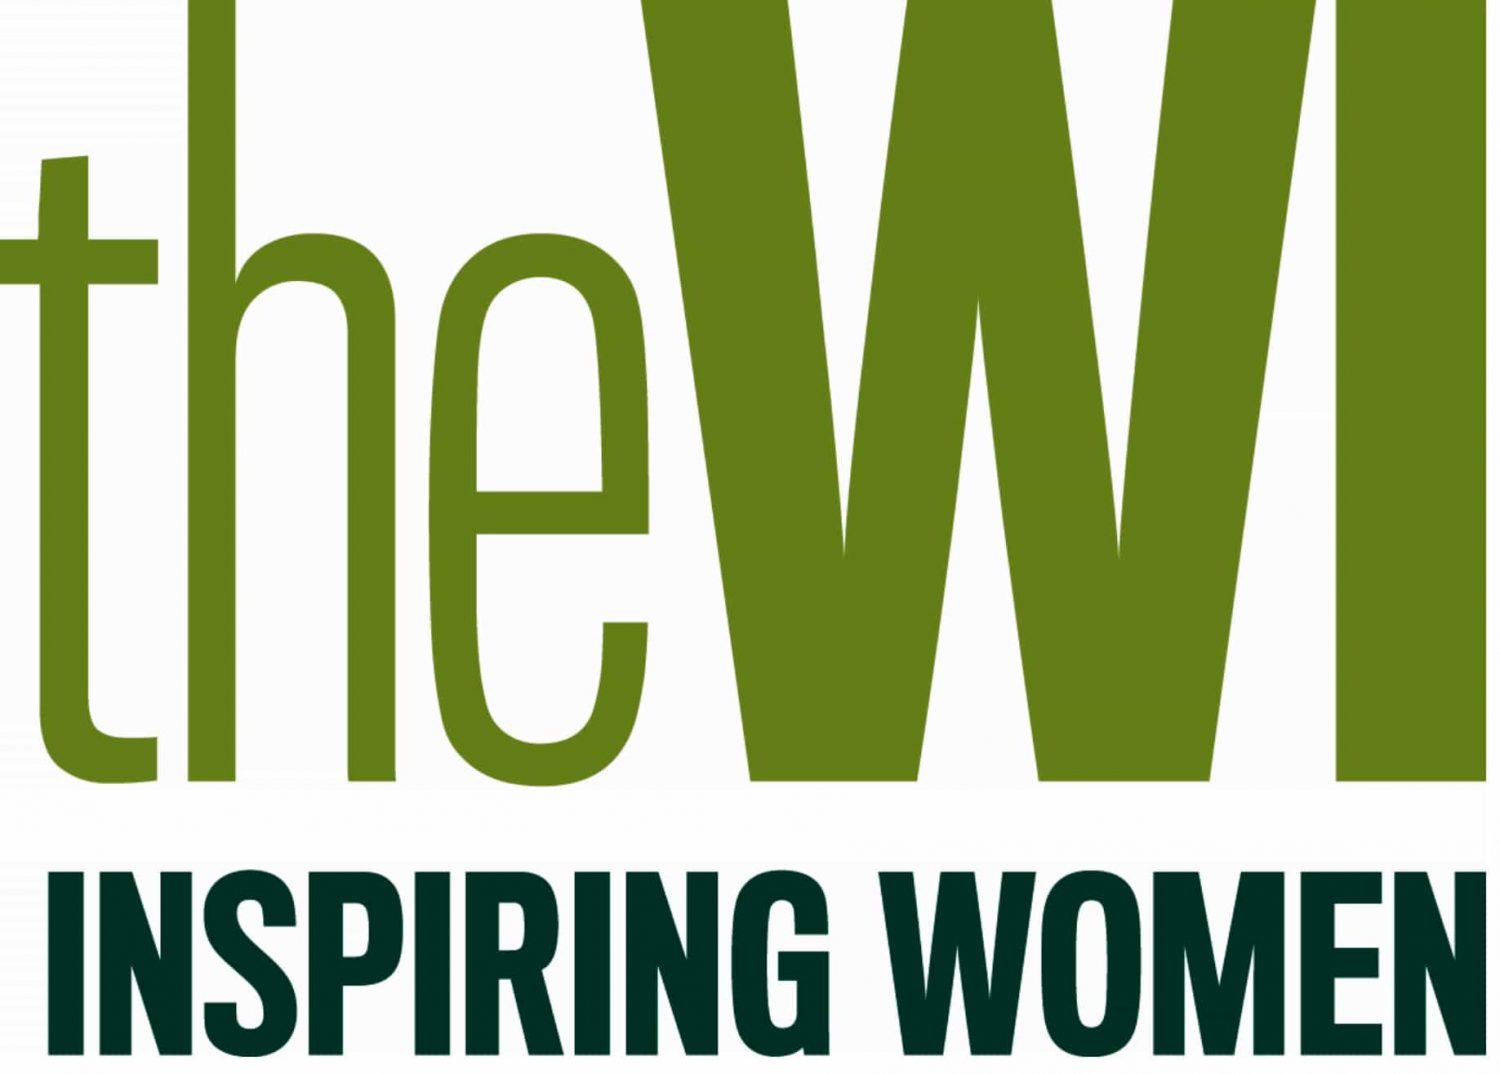 Green text logo of the WI